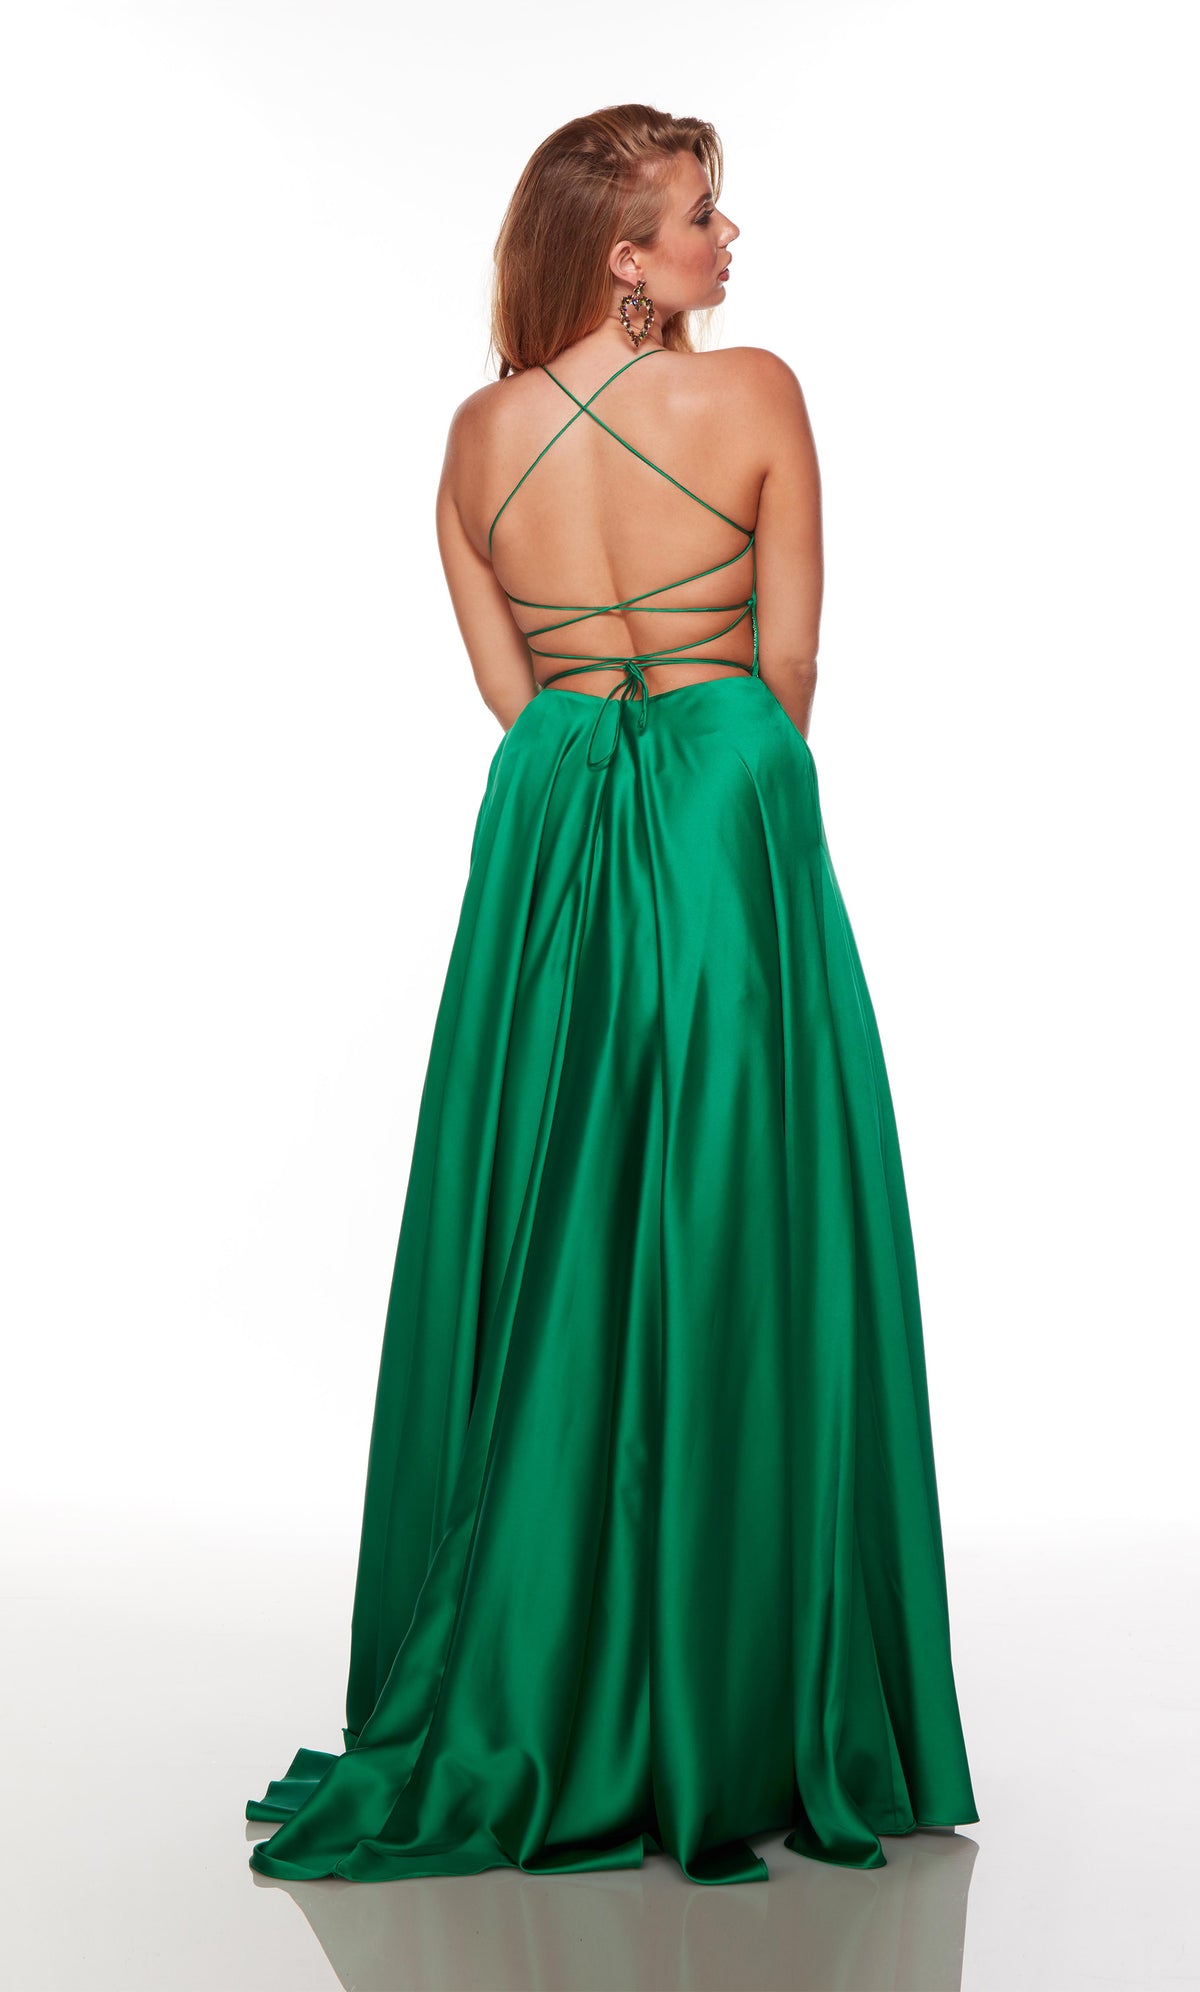 Green plus size dress with a strappy, lace-up back and train.